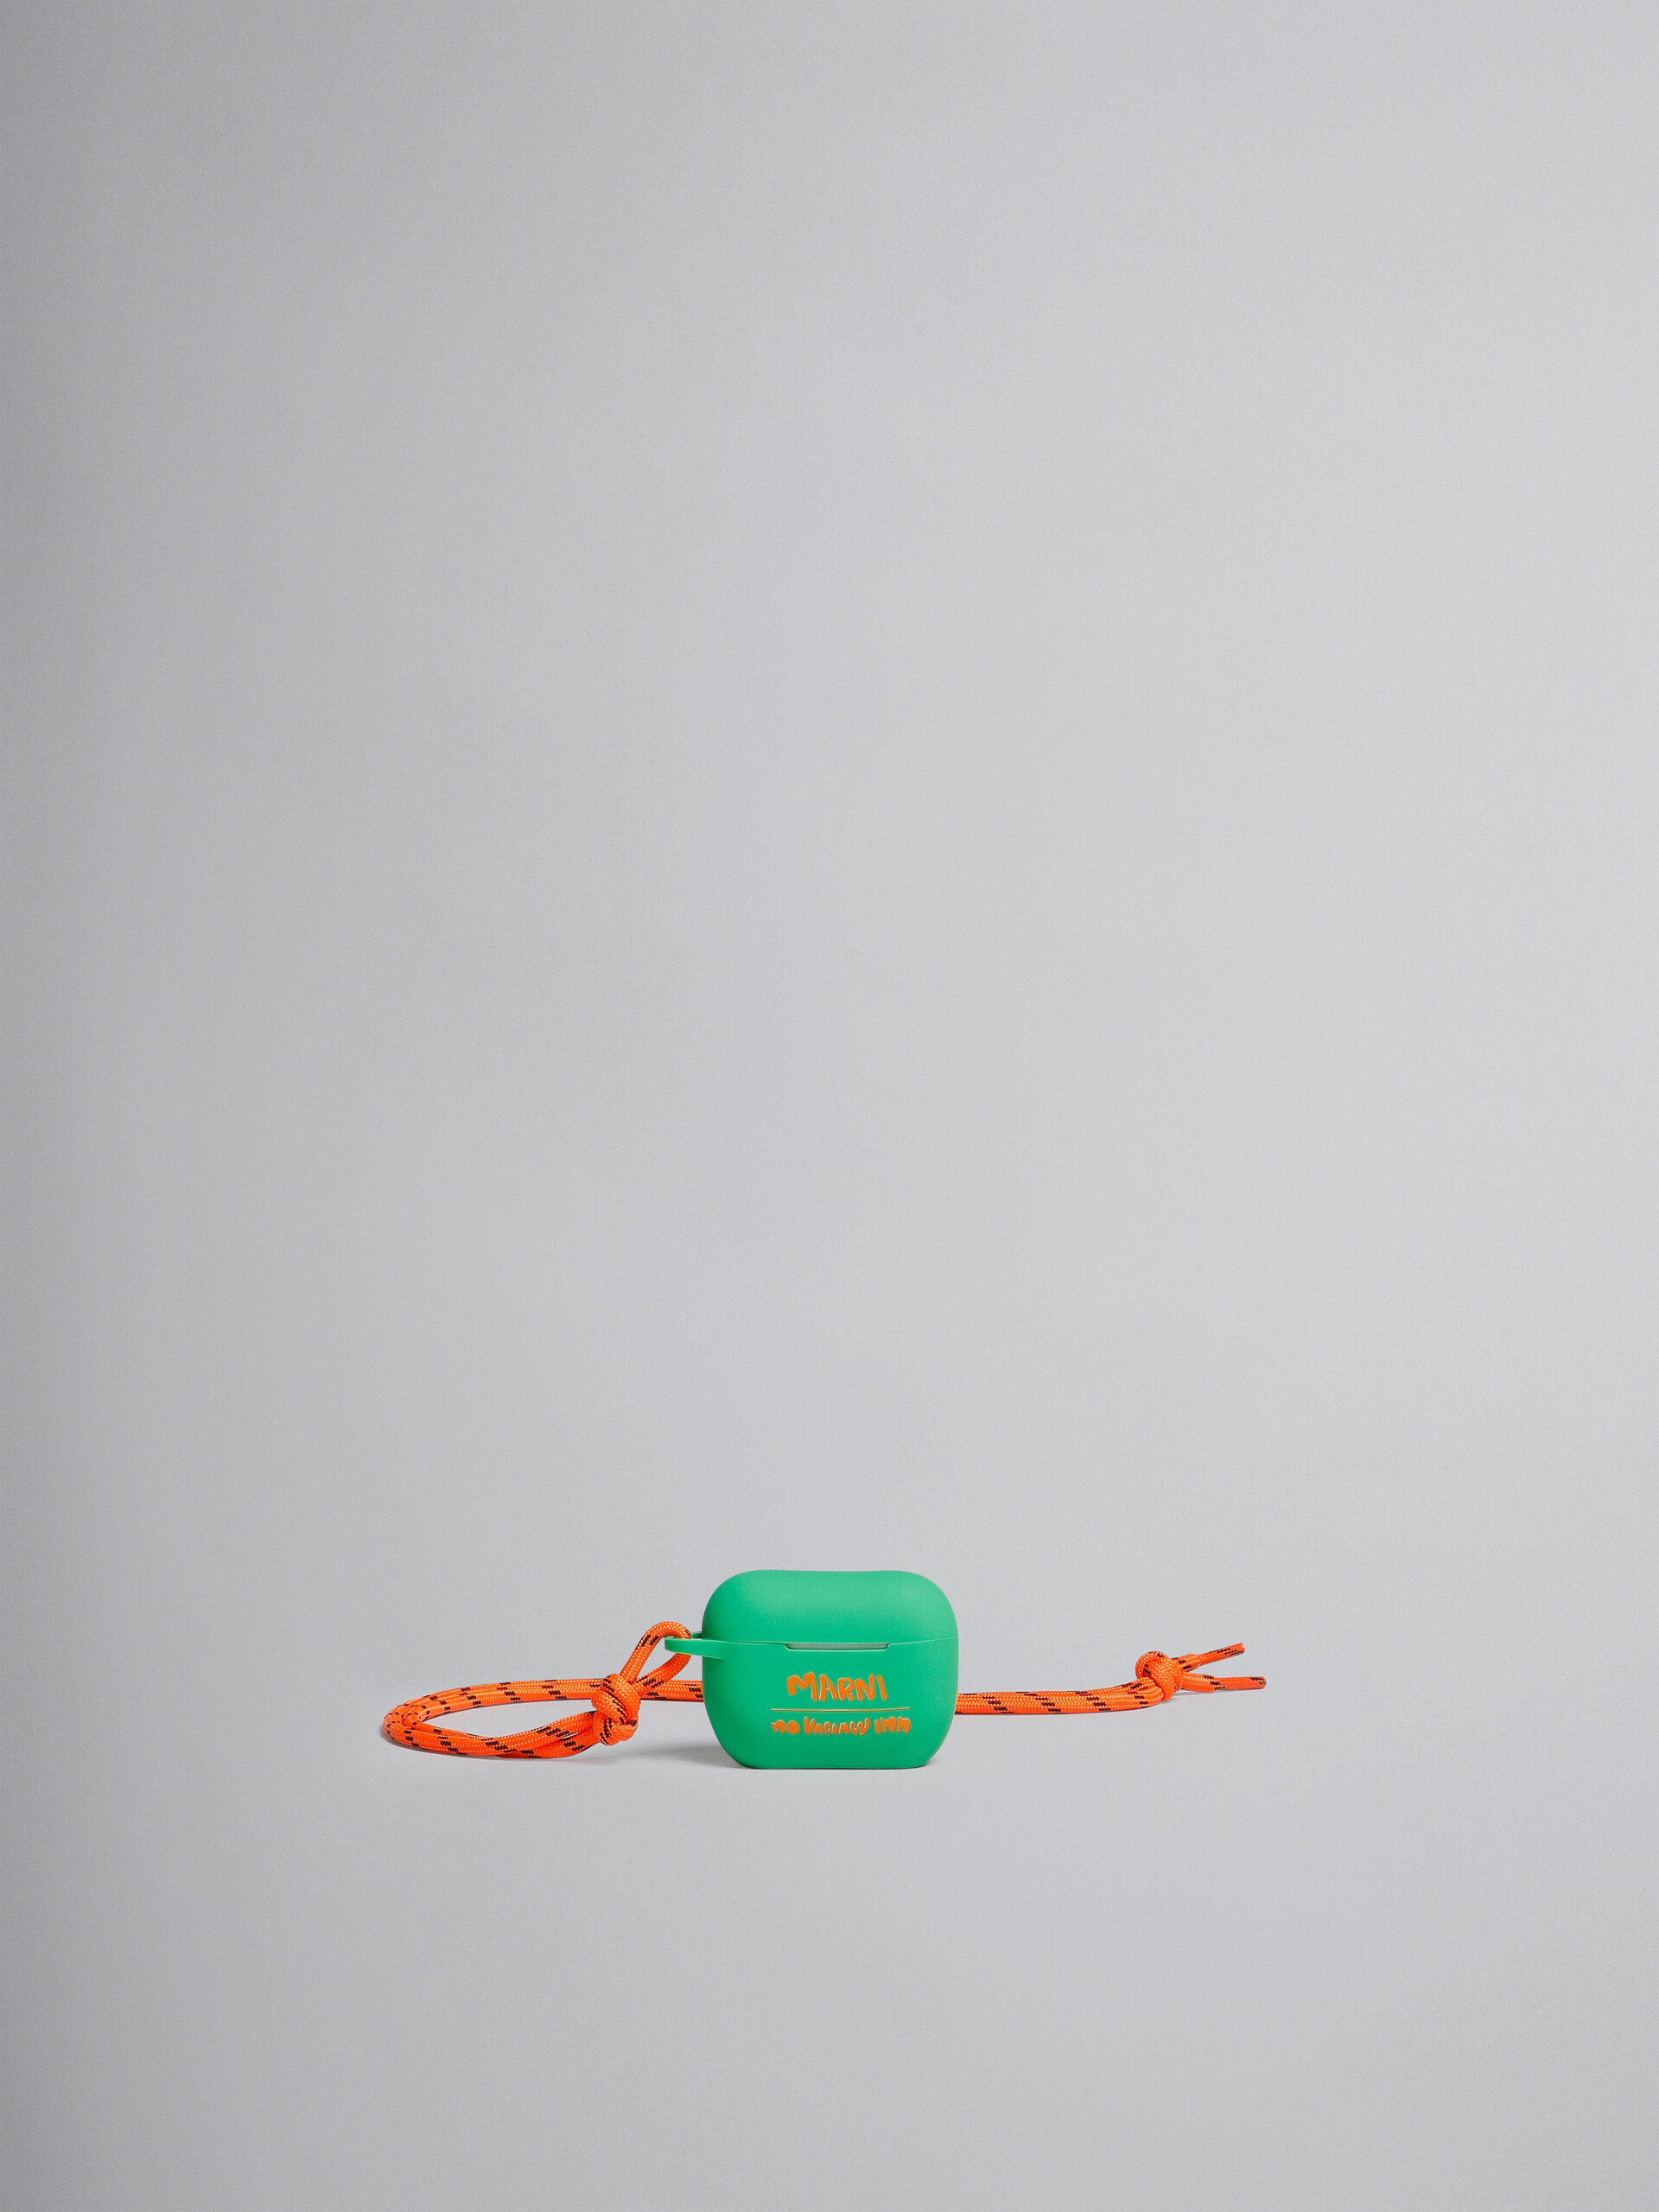 Marni x No Vacancy Inn - Green and orange Airpods case - Other accessories - Image 1